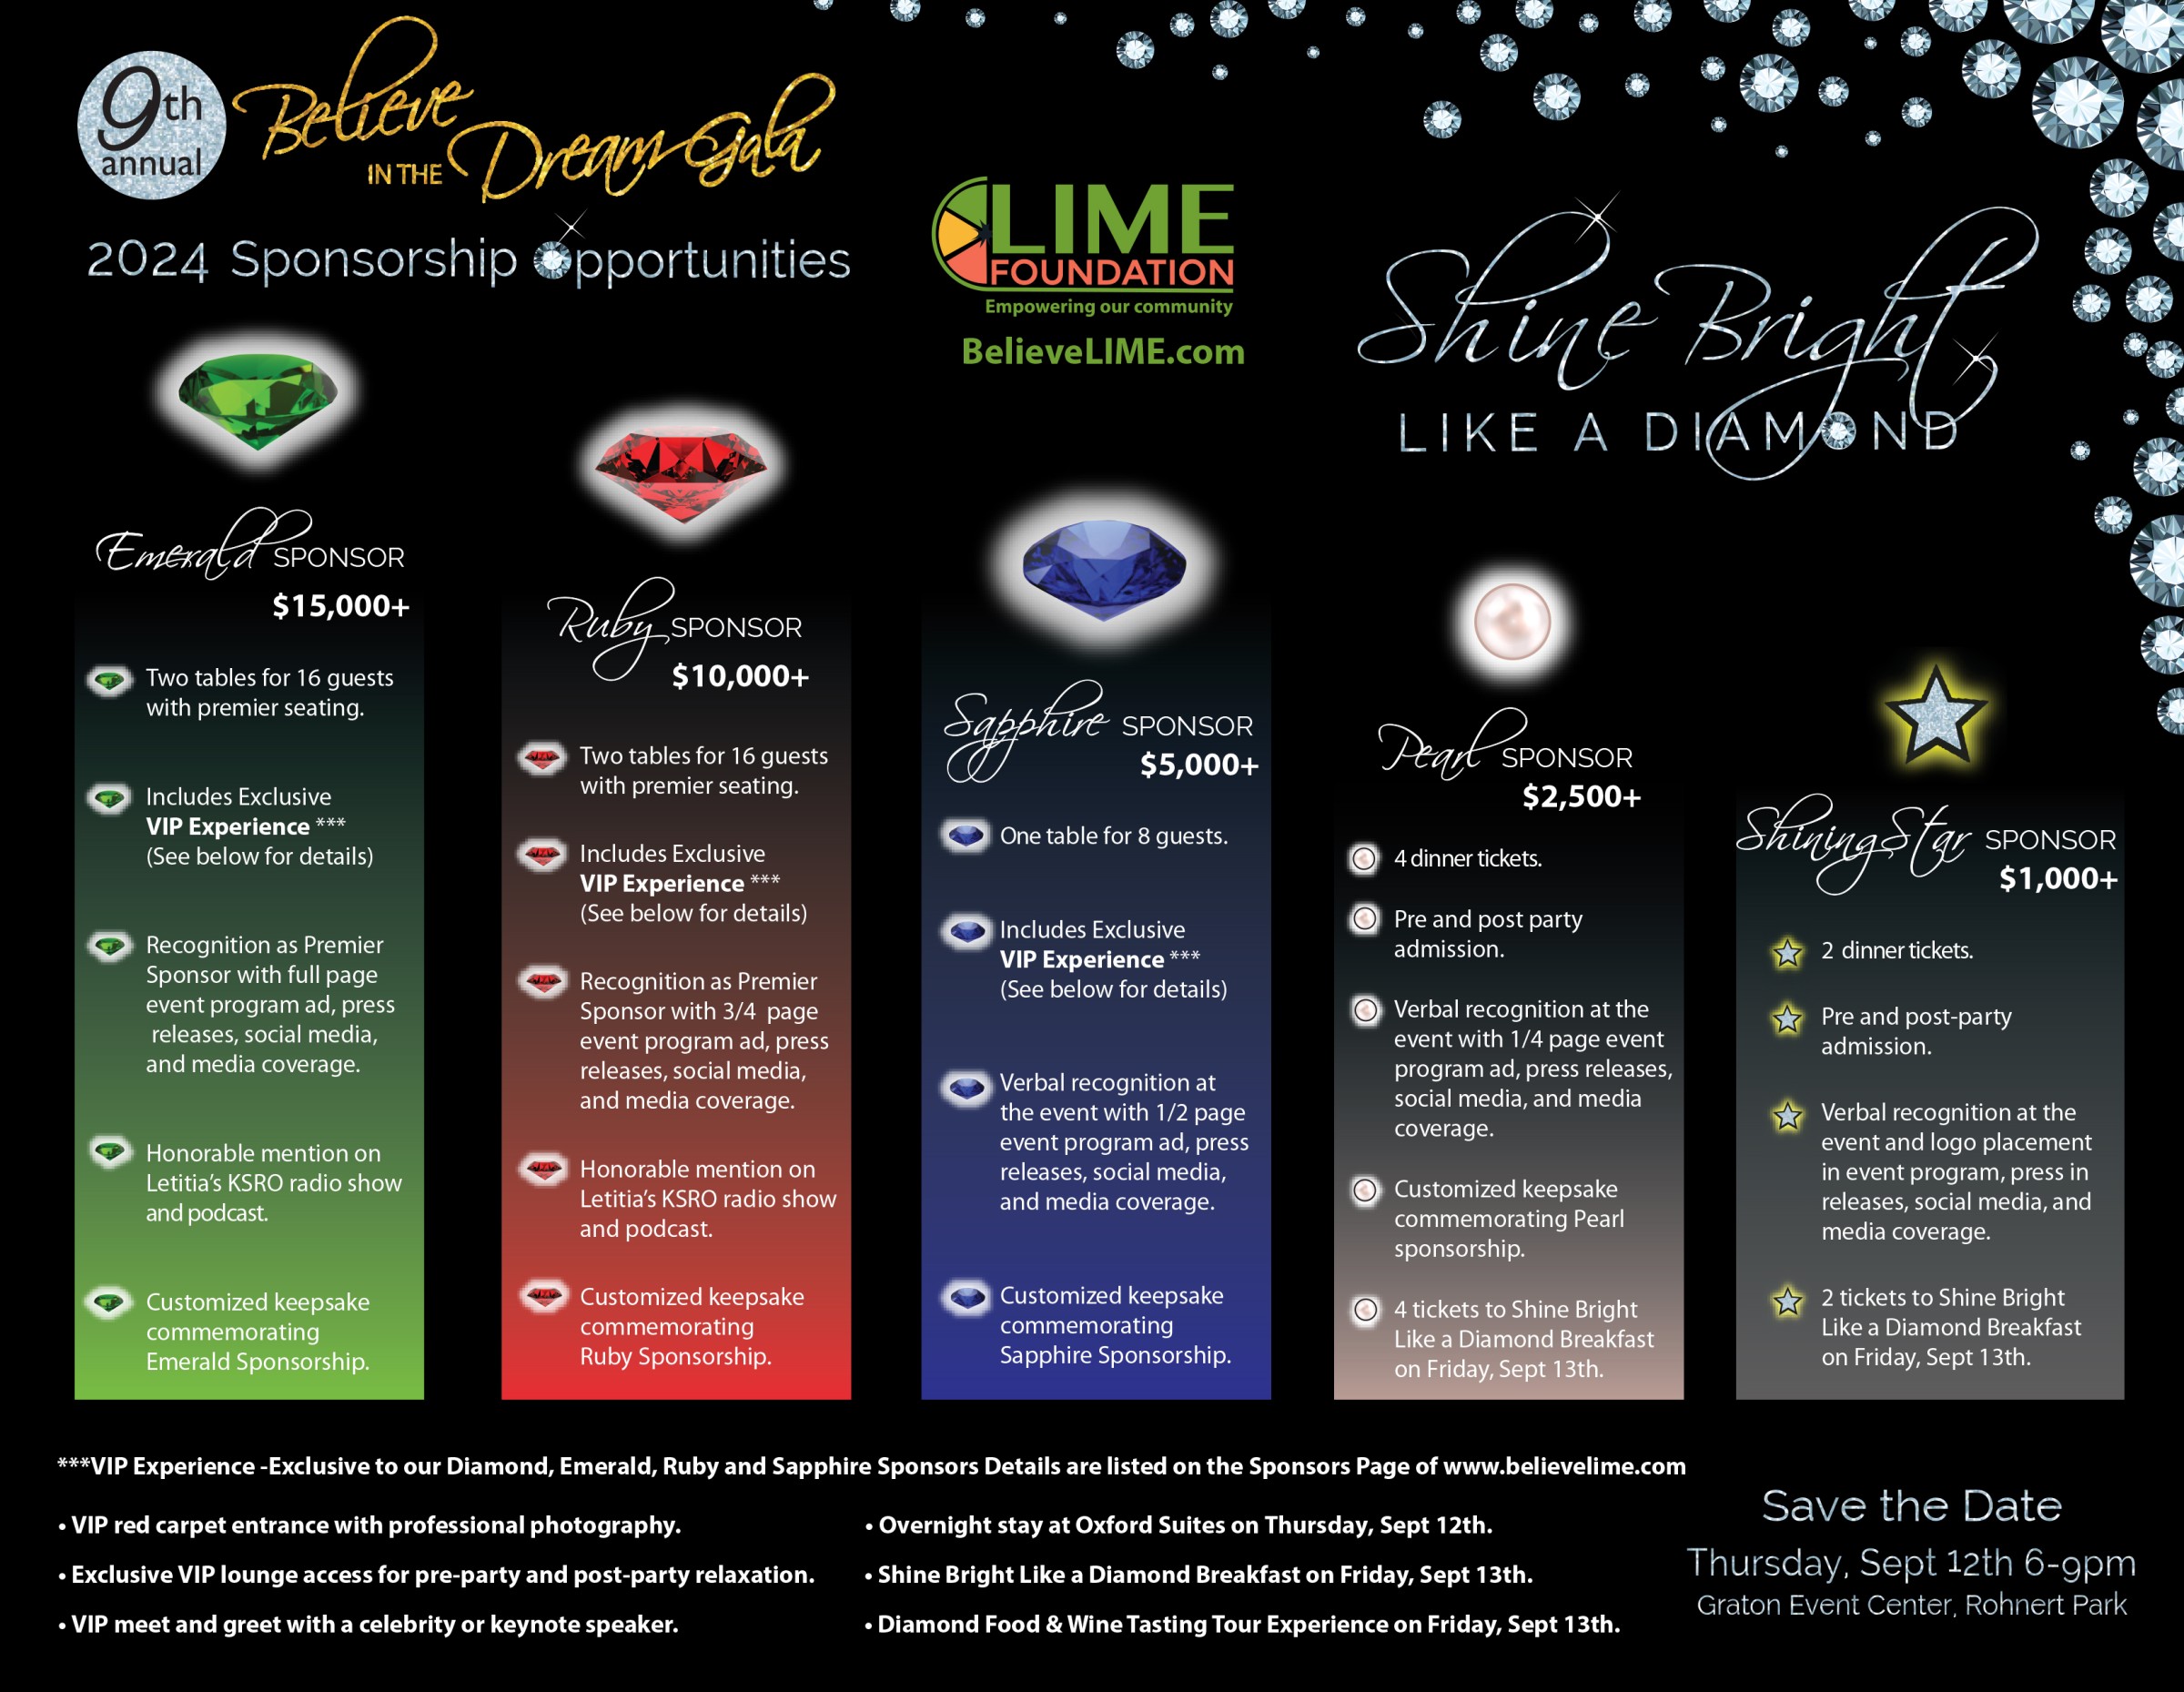 Promotional poster for the 2024 annual "Believe The Dream" gala event, featuring information on various sponsorship levels and details of the event’s offerings, using a nighttime sky theme.